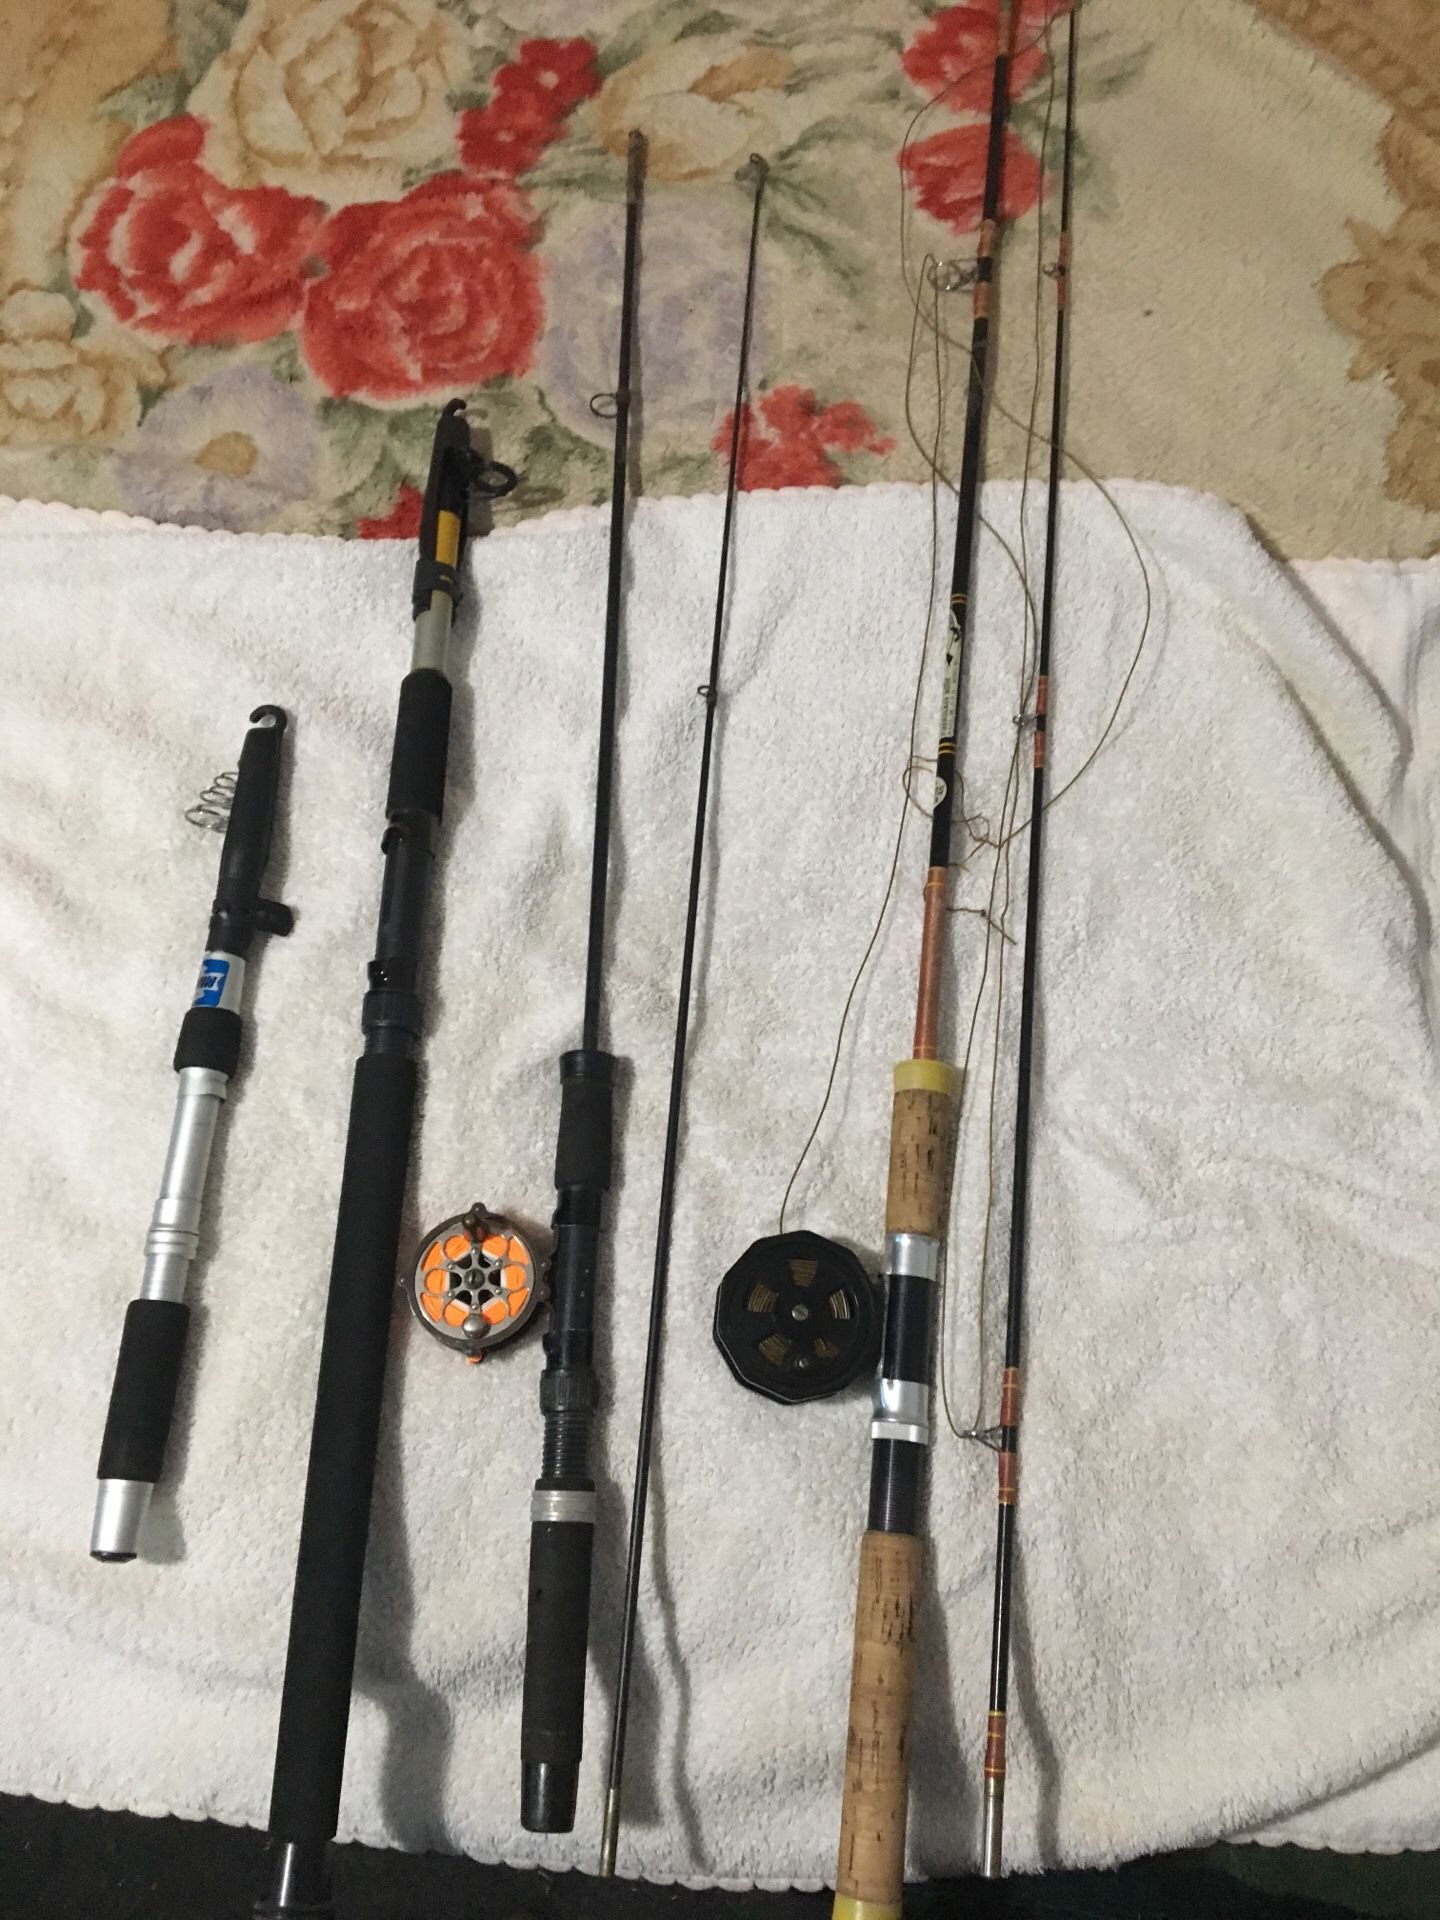 Two fly fishing and two regular fishing rods